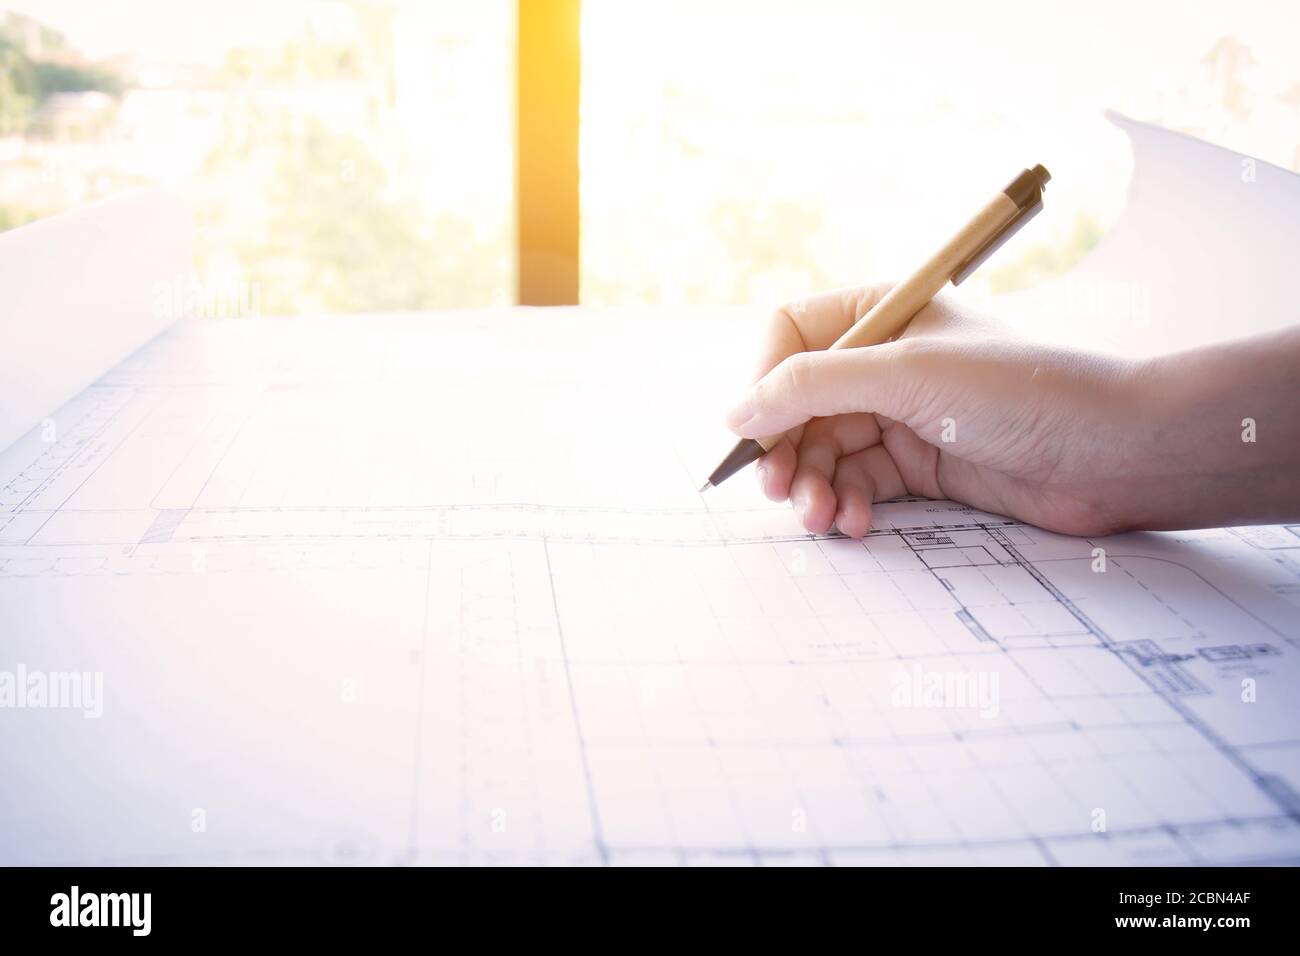 Construction , designer and renovate concept. : Architect working on blueprint, architects workplace. Architectural drawning pencil working with new s Stock Photo